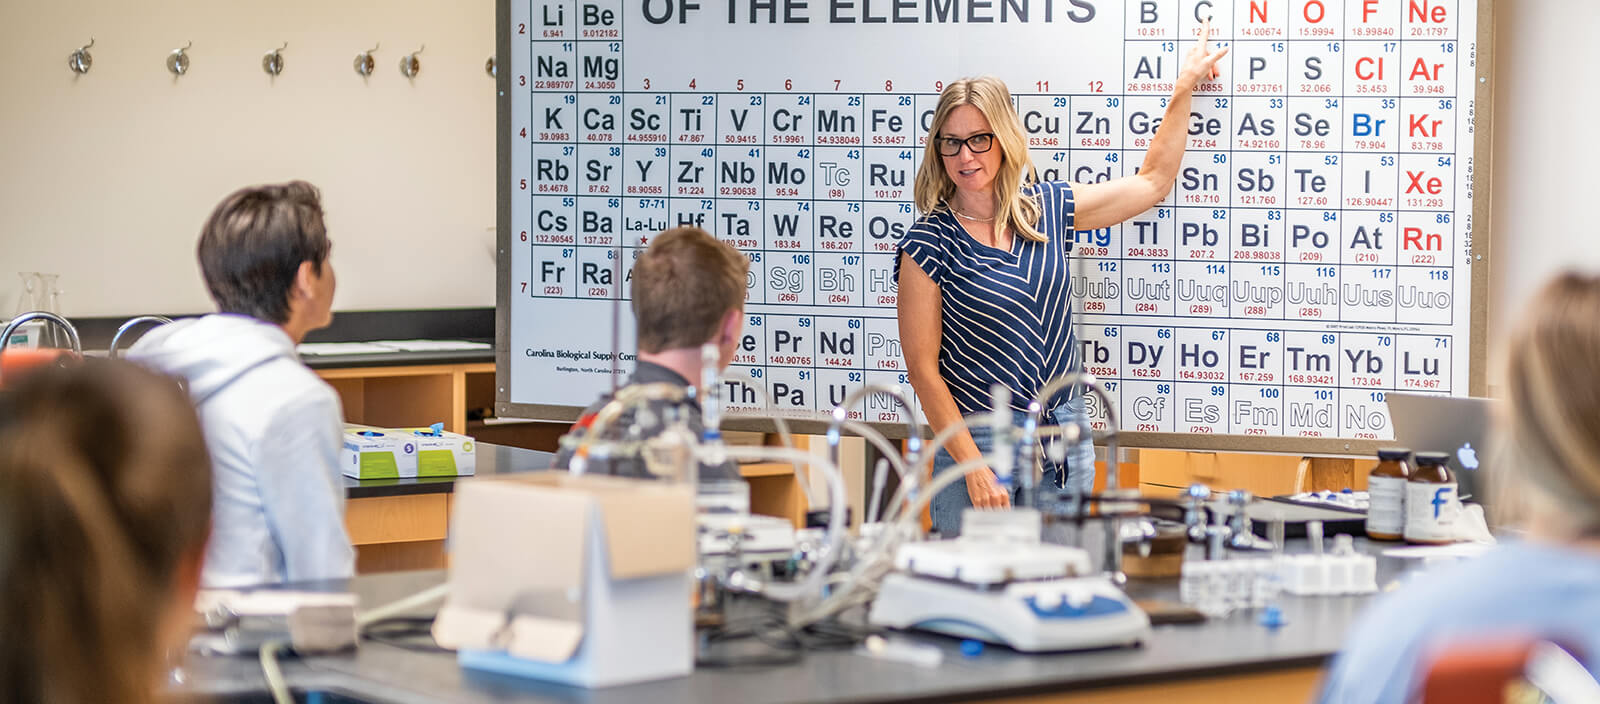 Professor Cyndi Oschner teaching in front of a periodic table